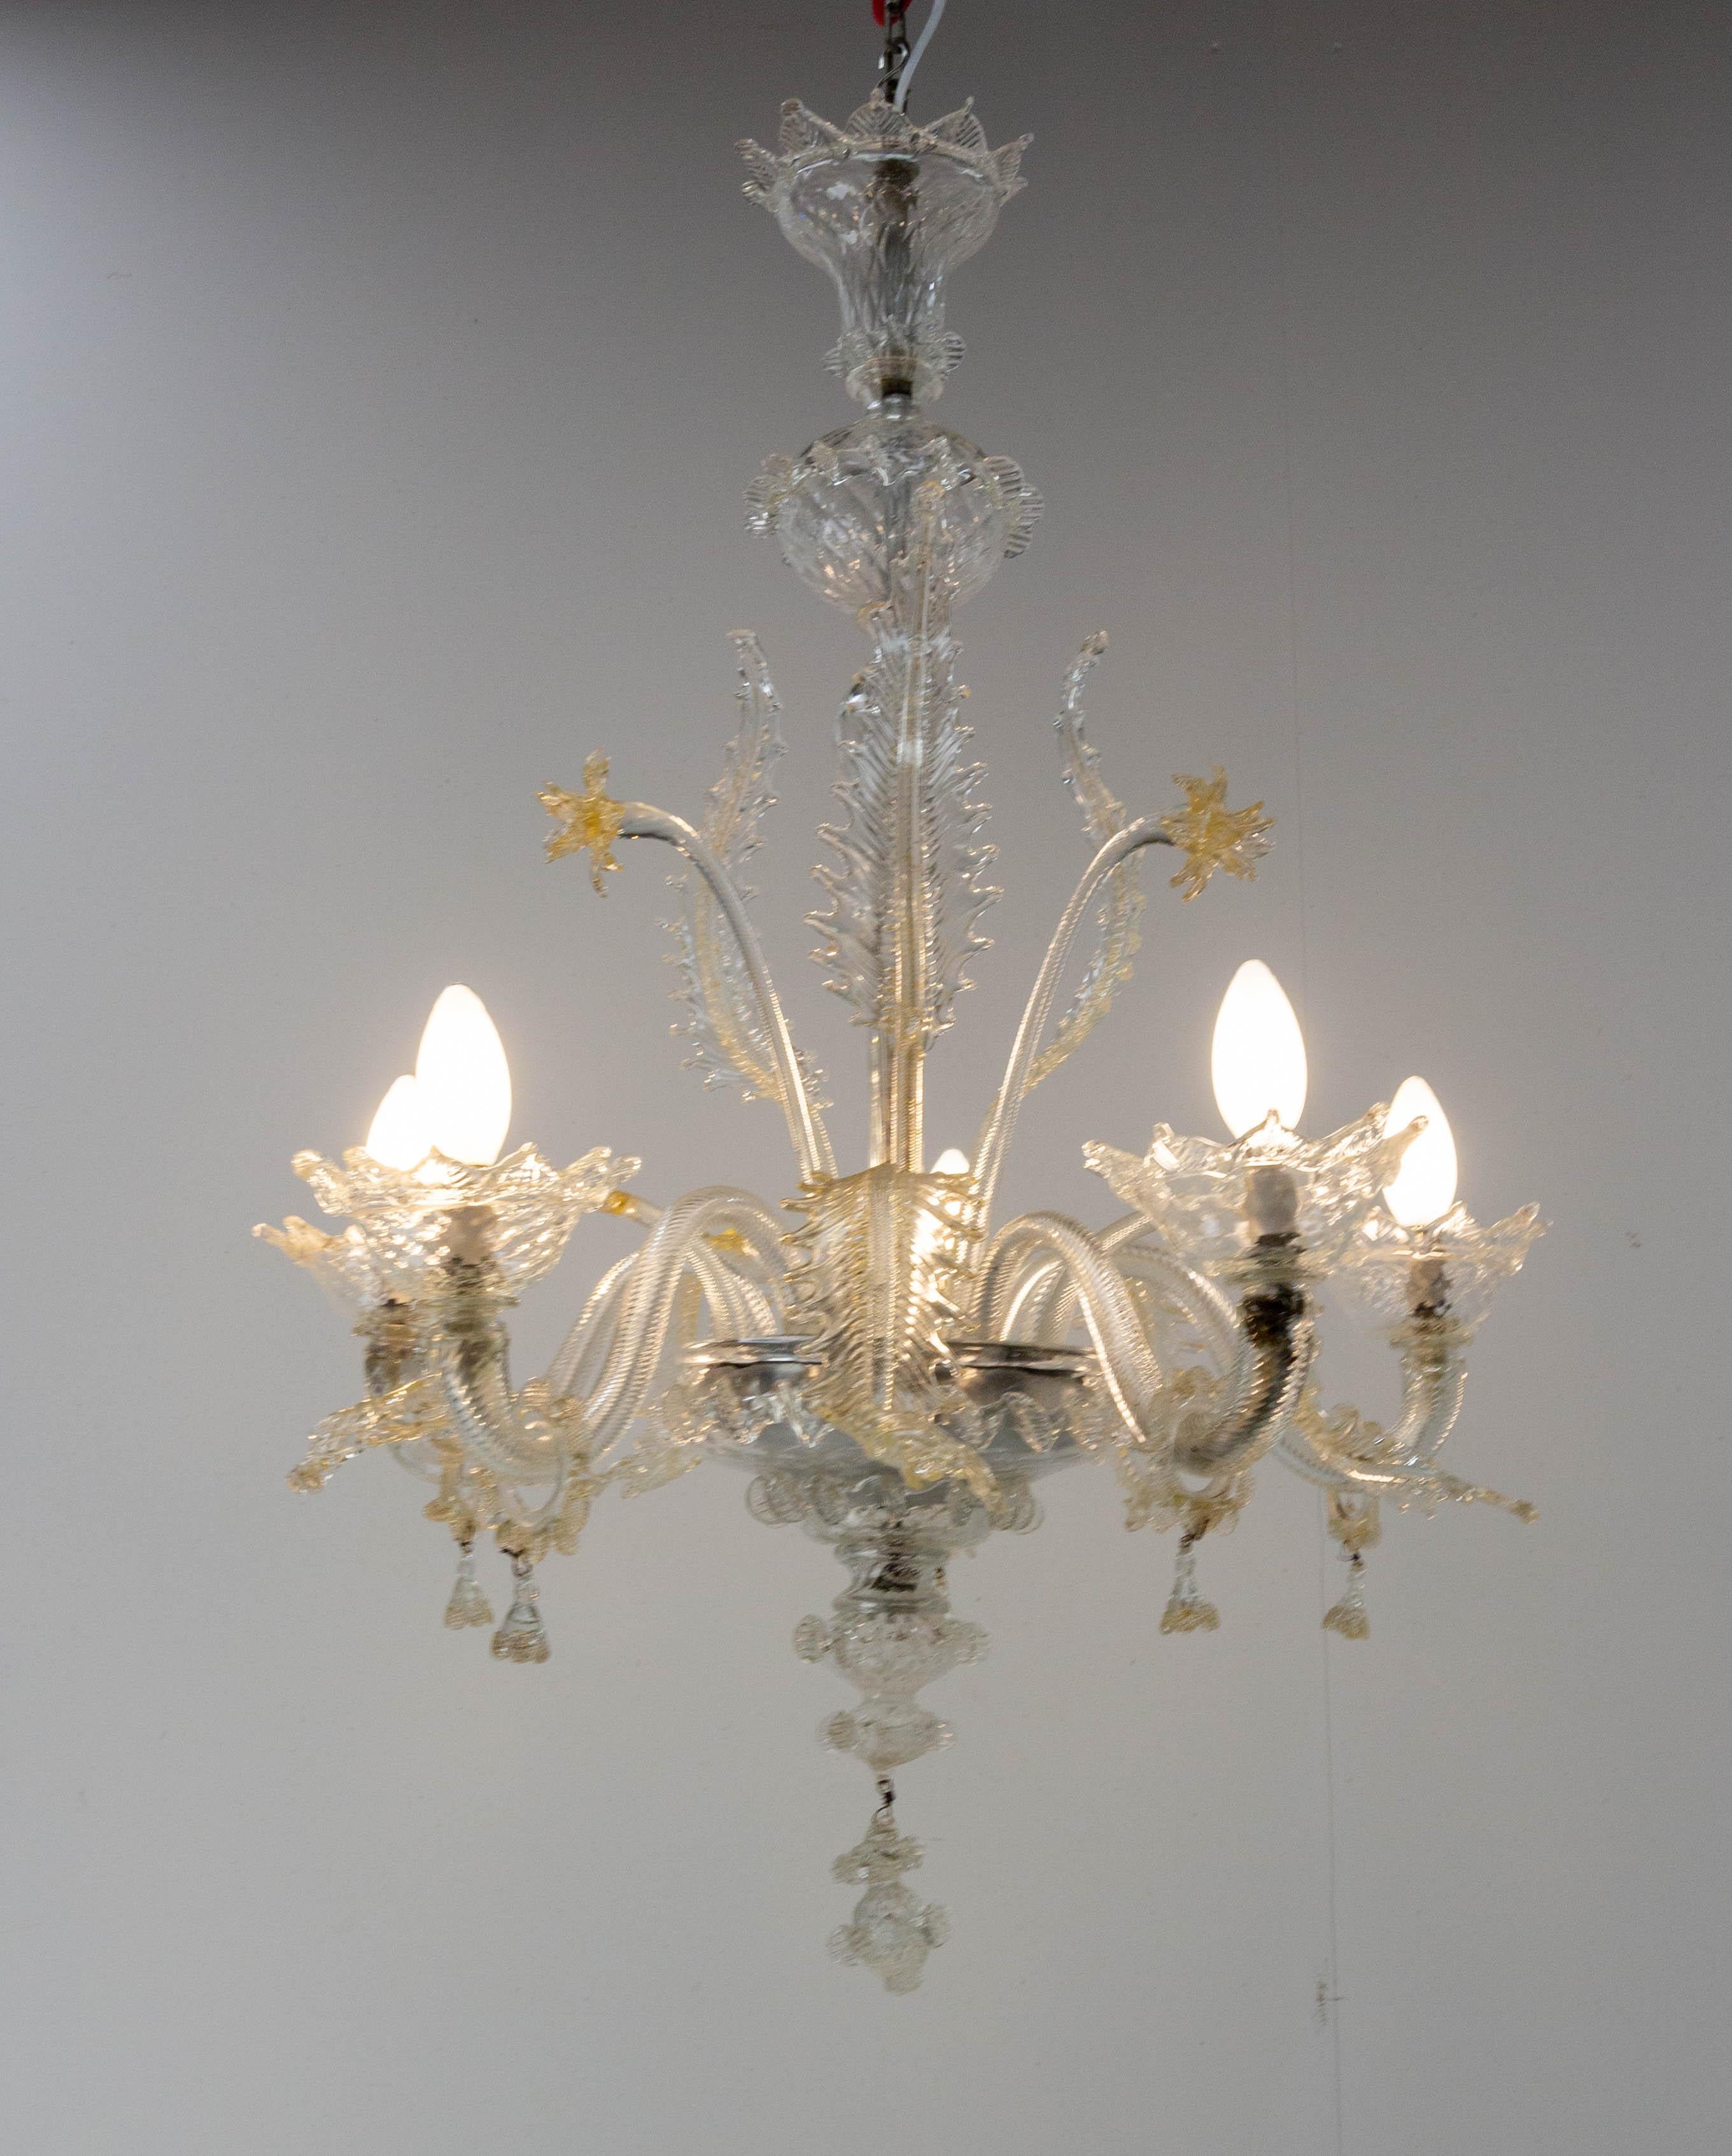 Classical murano ceiling pendant
Lustre of crystal with gold inclusions
Good vintage condition.
This lustre has been rewired to USA or EU and UK standards.

Shipping:
D64 H80 6.6 kg.